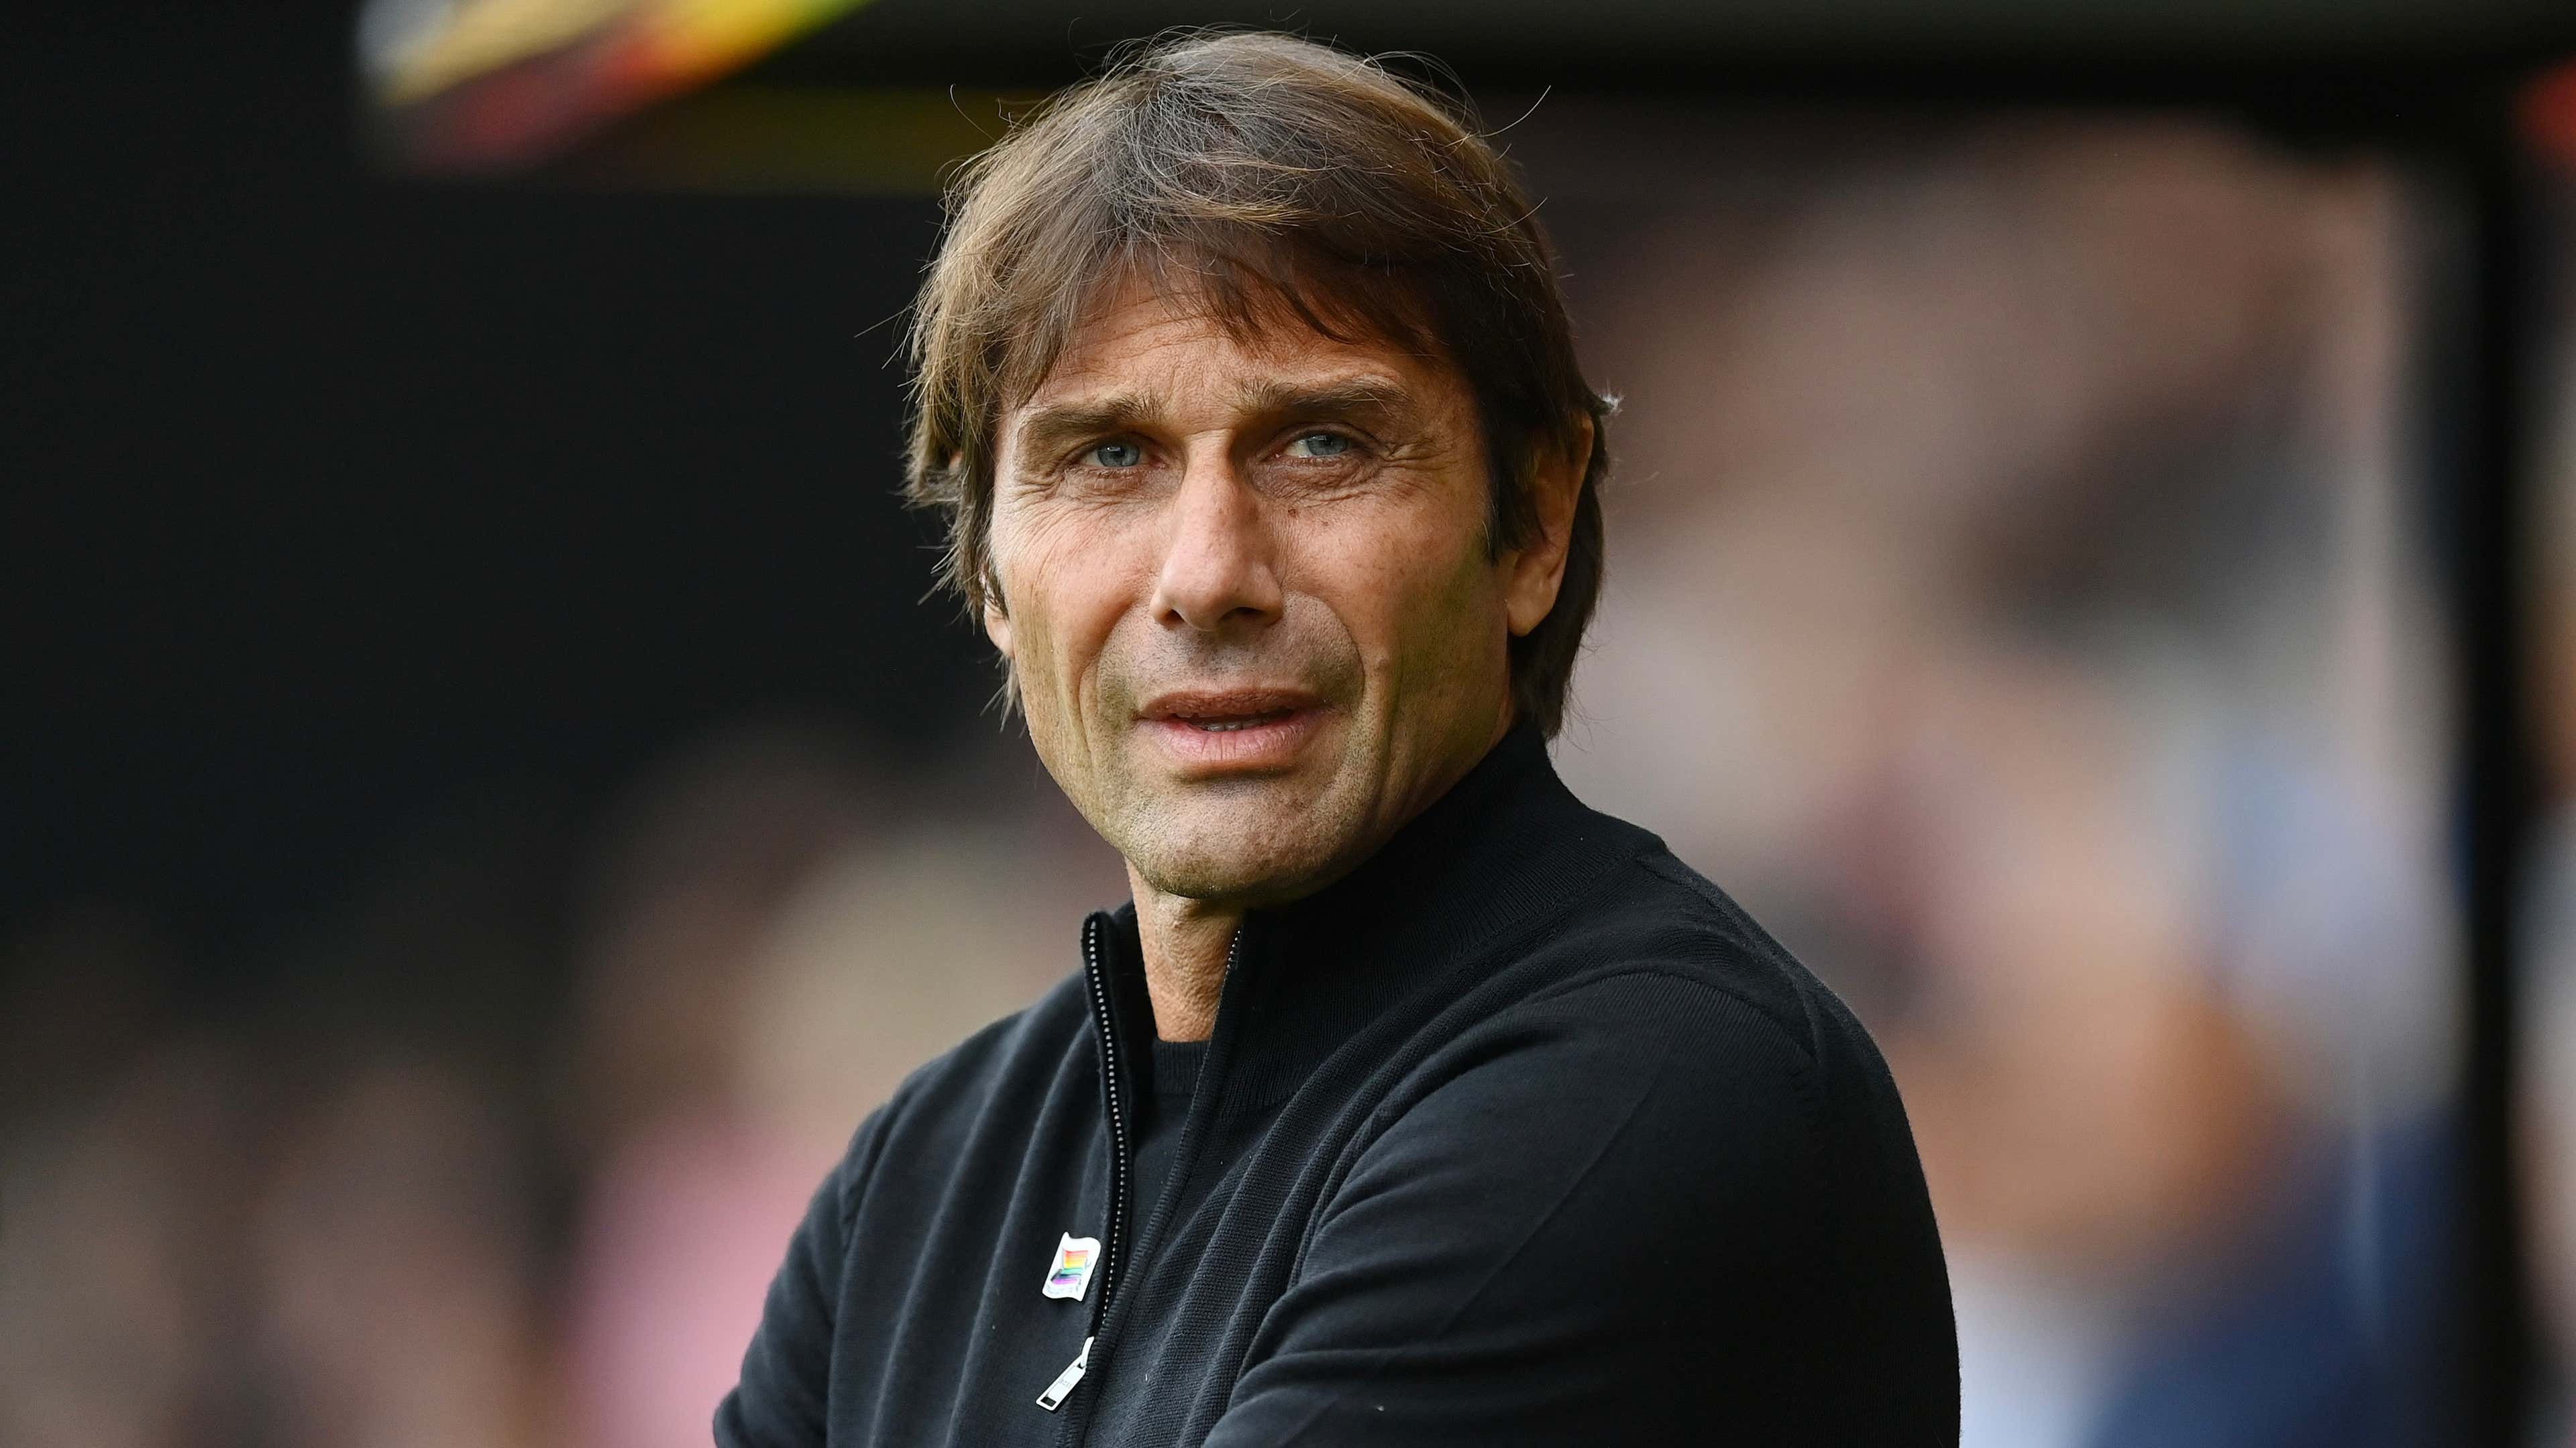 Some had decided to settle for less' - Antonio Conte aims thinly-veiled  Tottenham dig but vows he hasn't lost his 'passion' for coaching | Goal.com